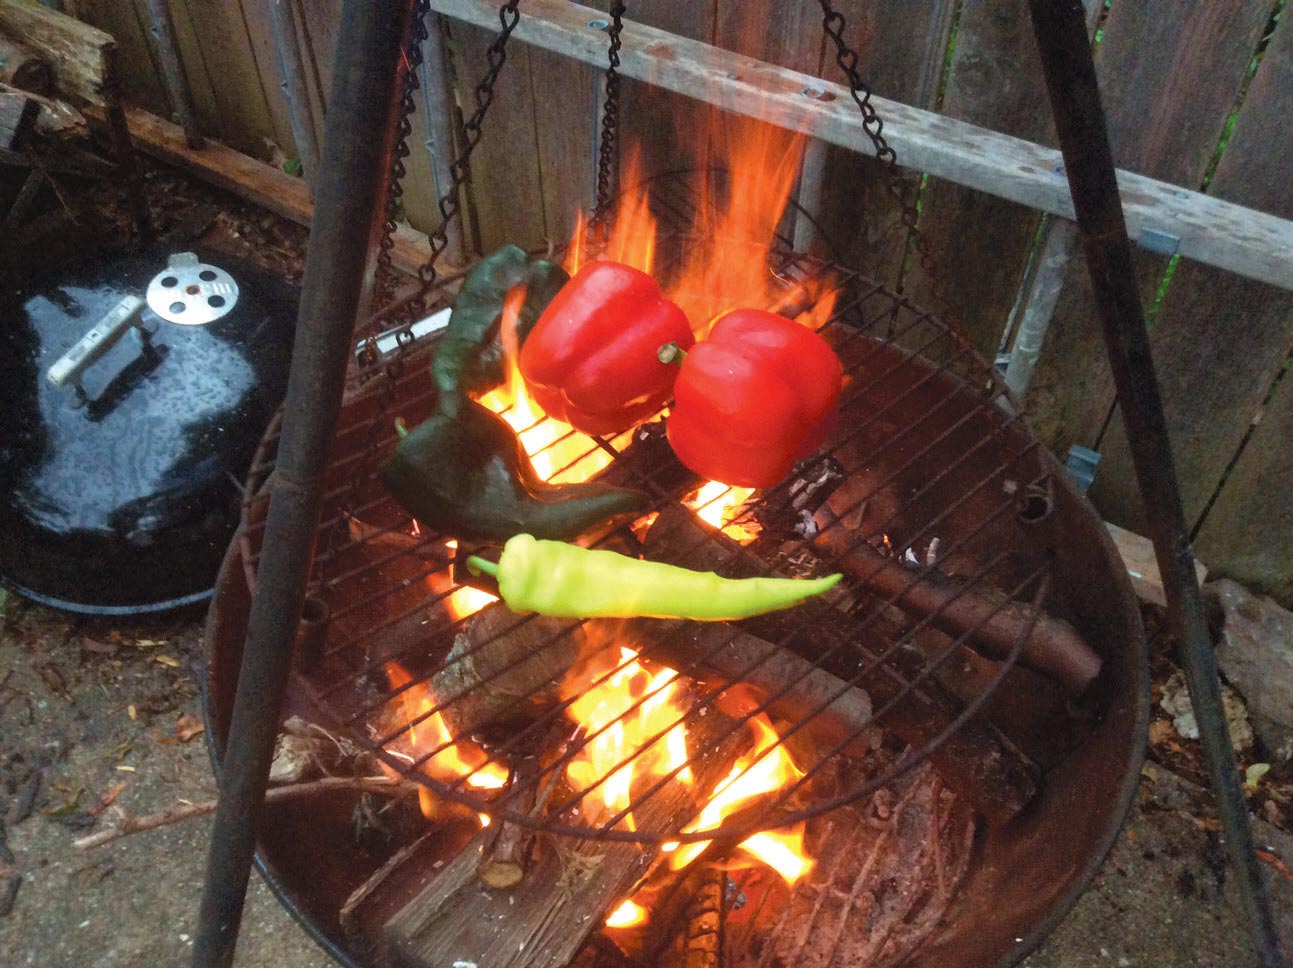 Peppers over an open flame